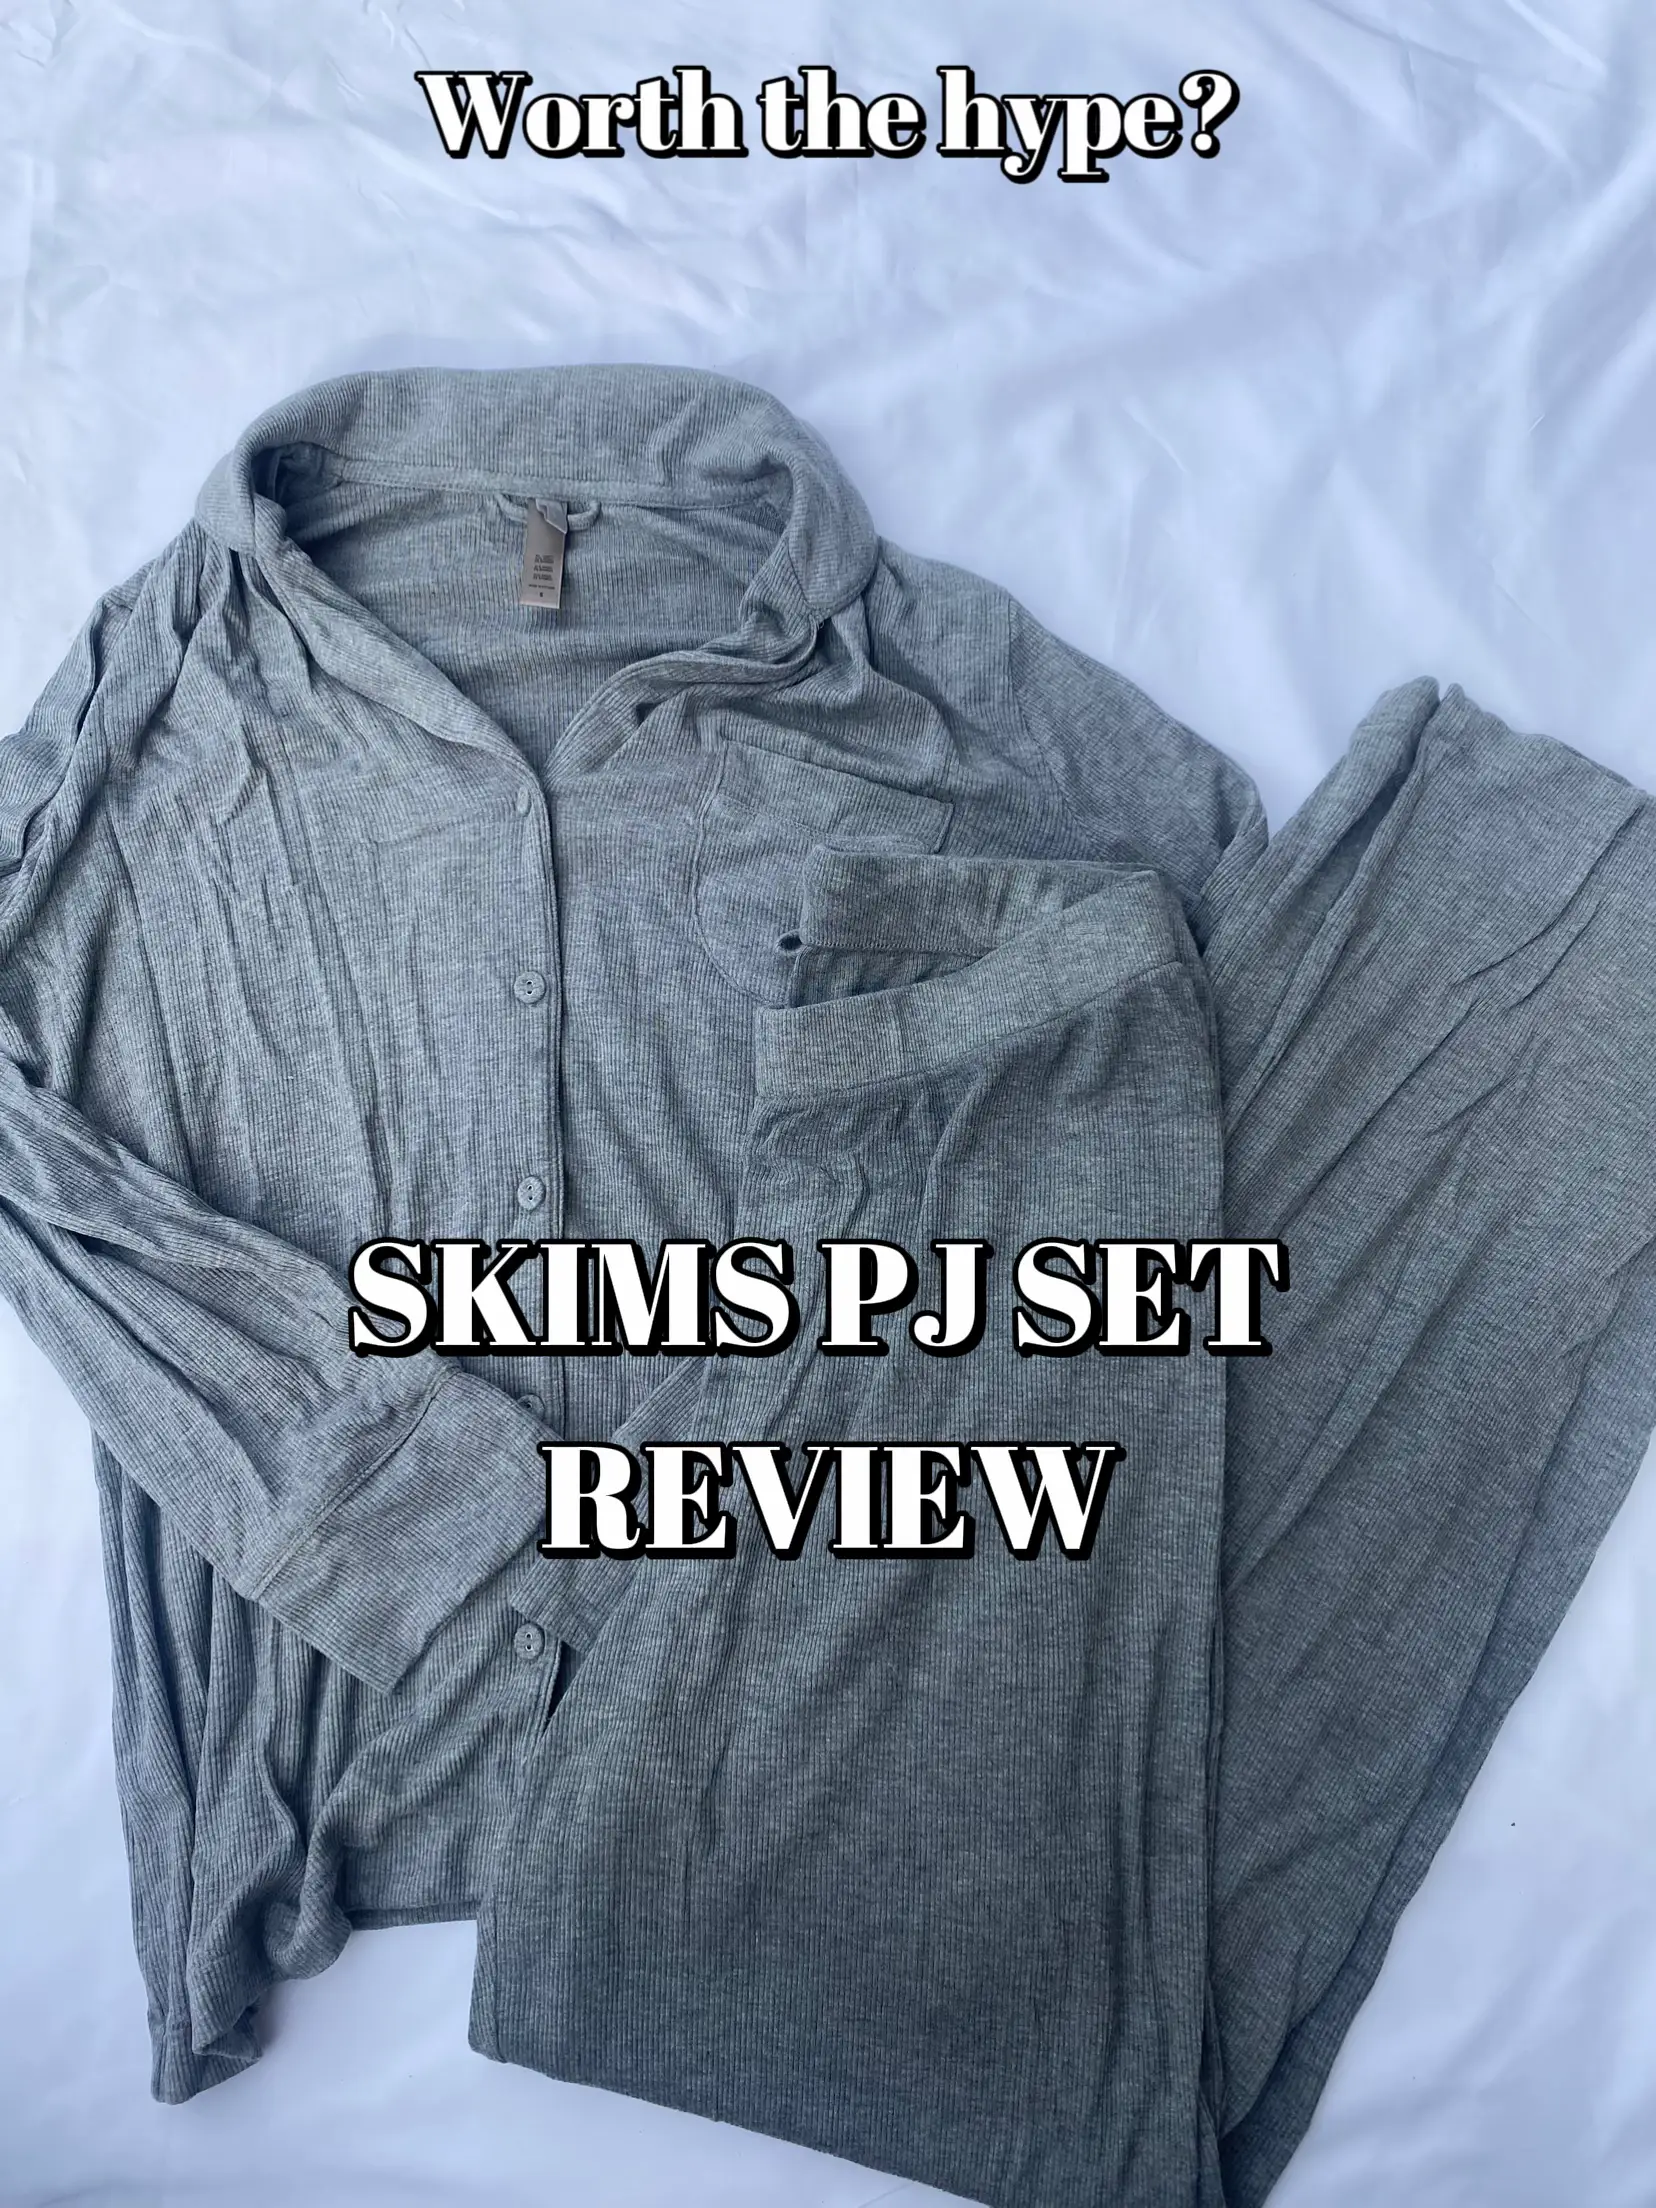 Eberjey Pajamas Review: Why the PJs Are Worth the Splurge